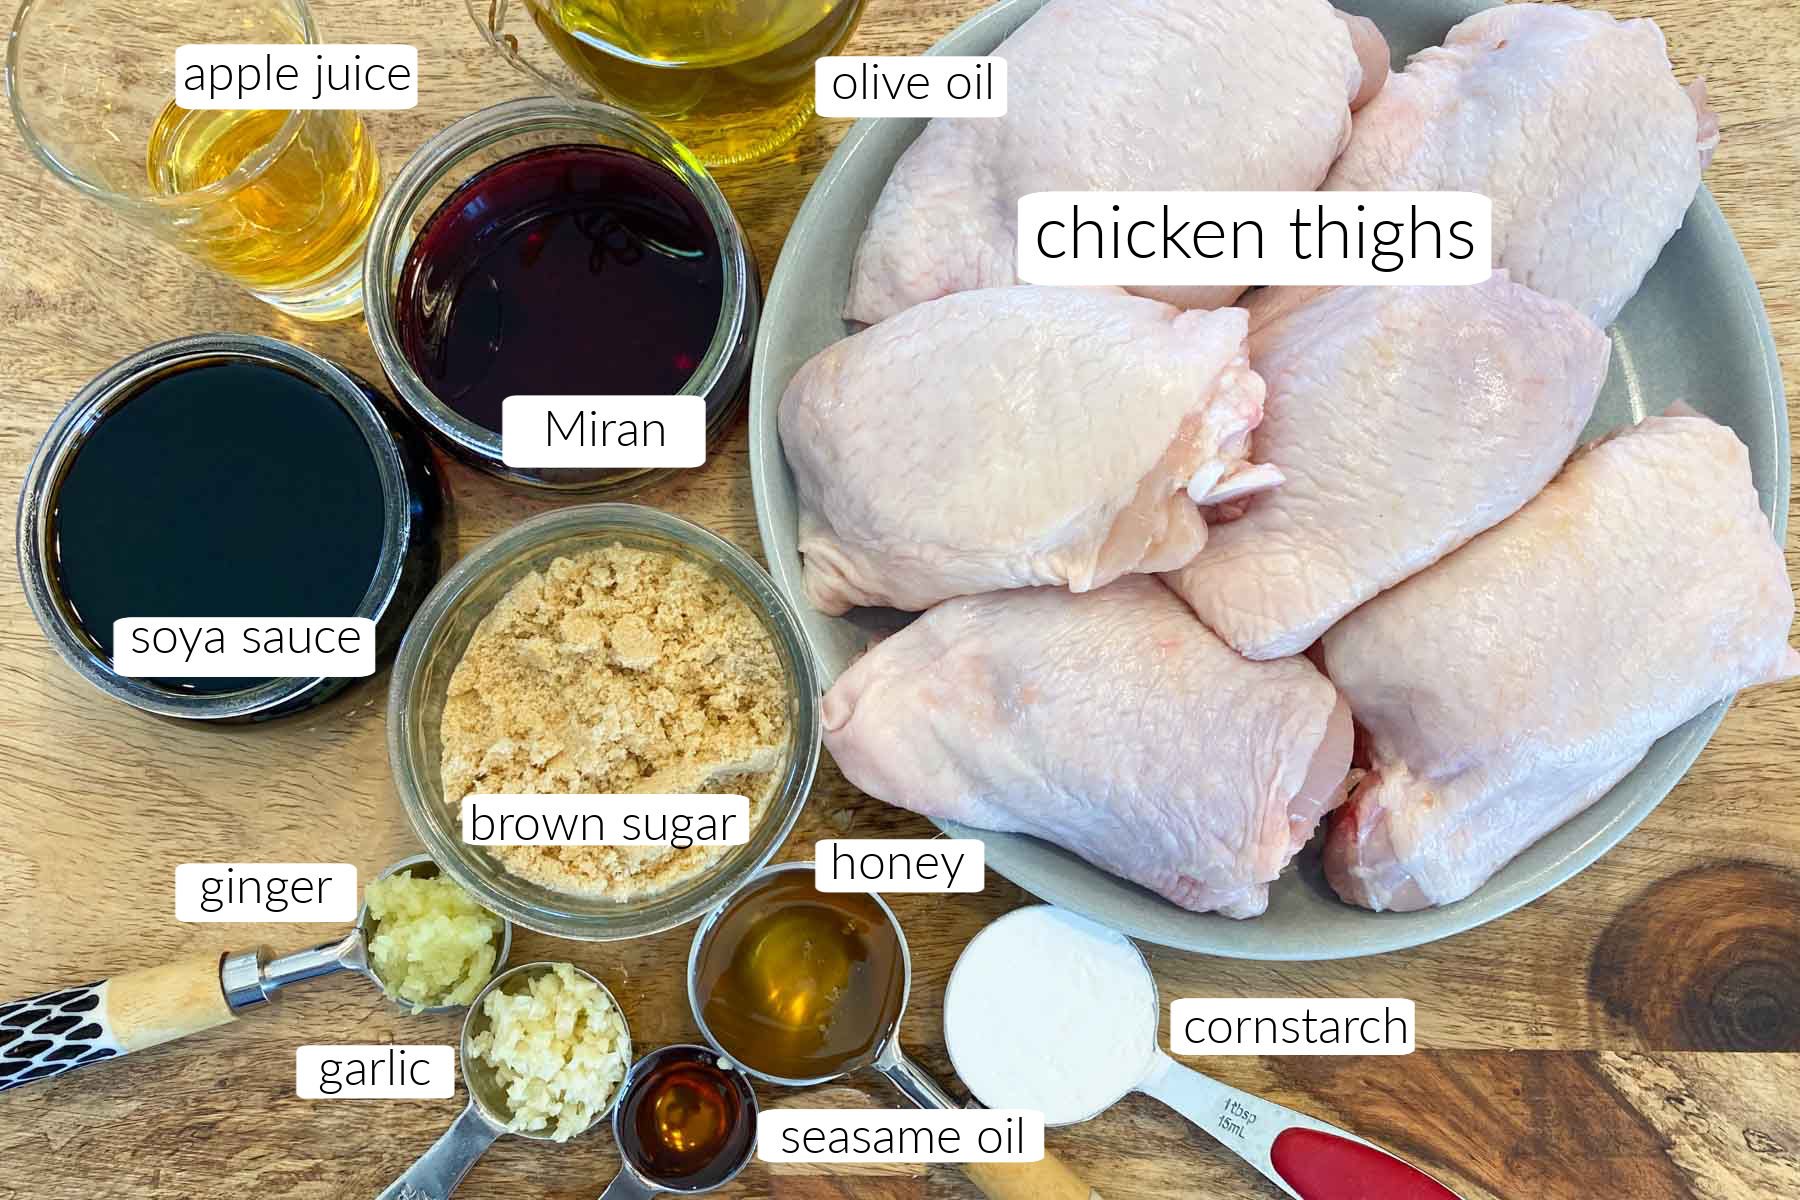 Ingredients measured out for making chicken thighs with teriyaki sauce.